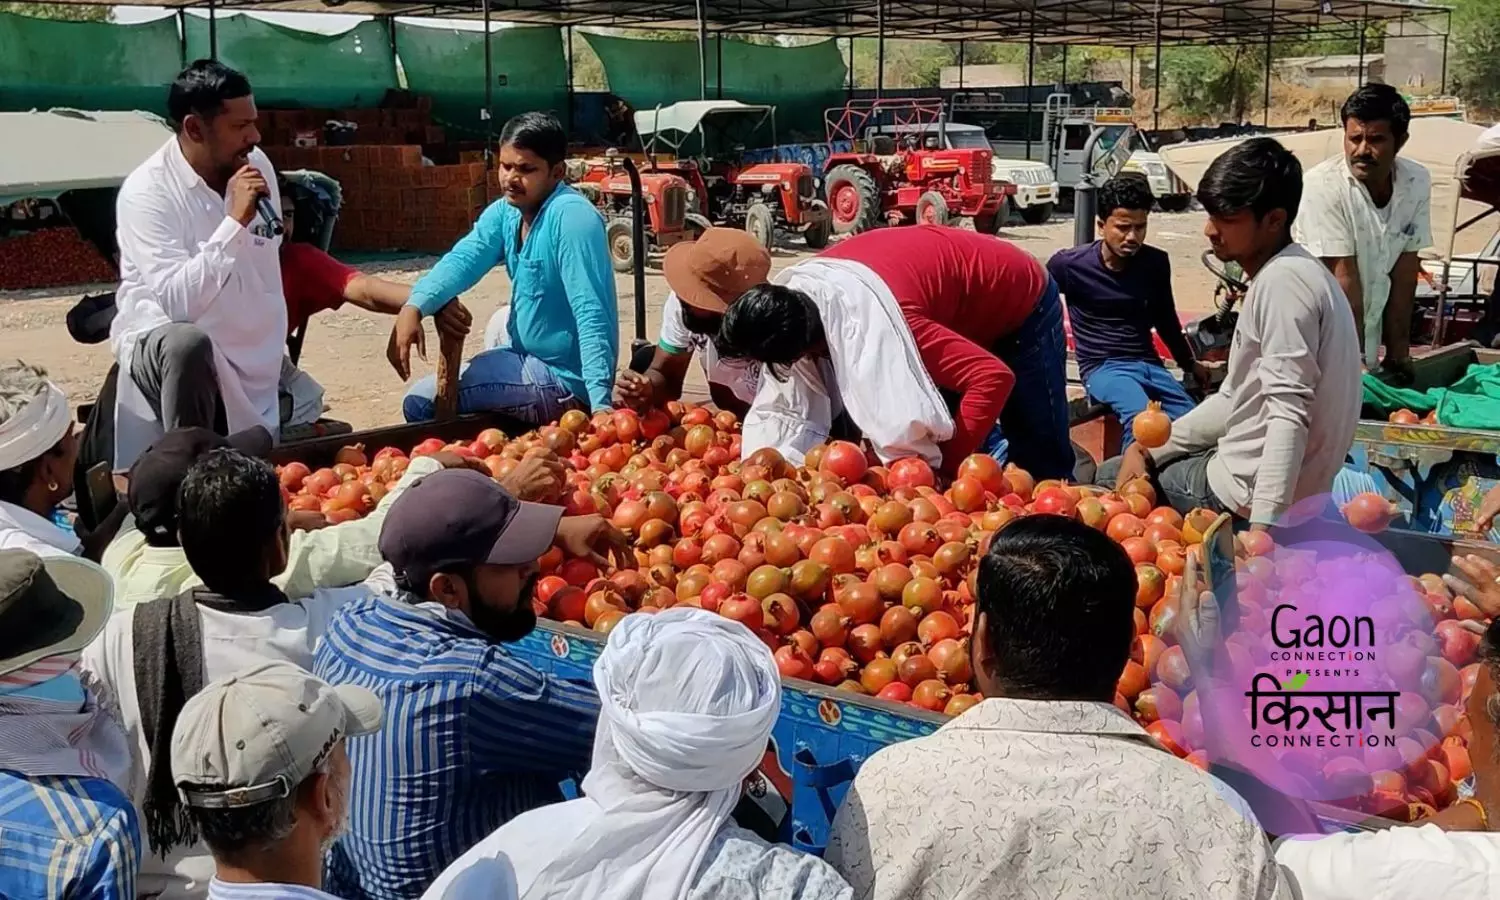 Farmers in Rajasthan grow pomegranates that are in high demand in the Gulf